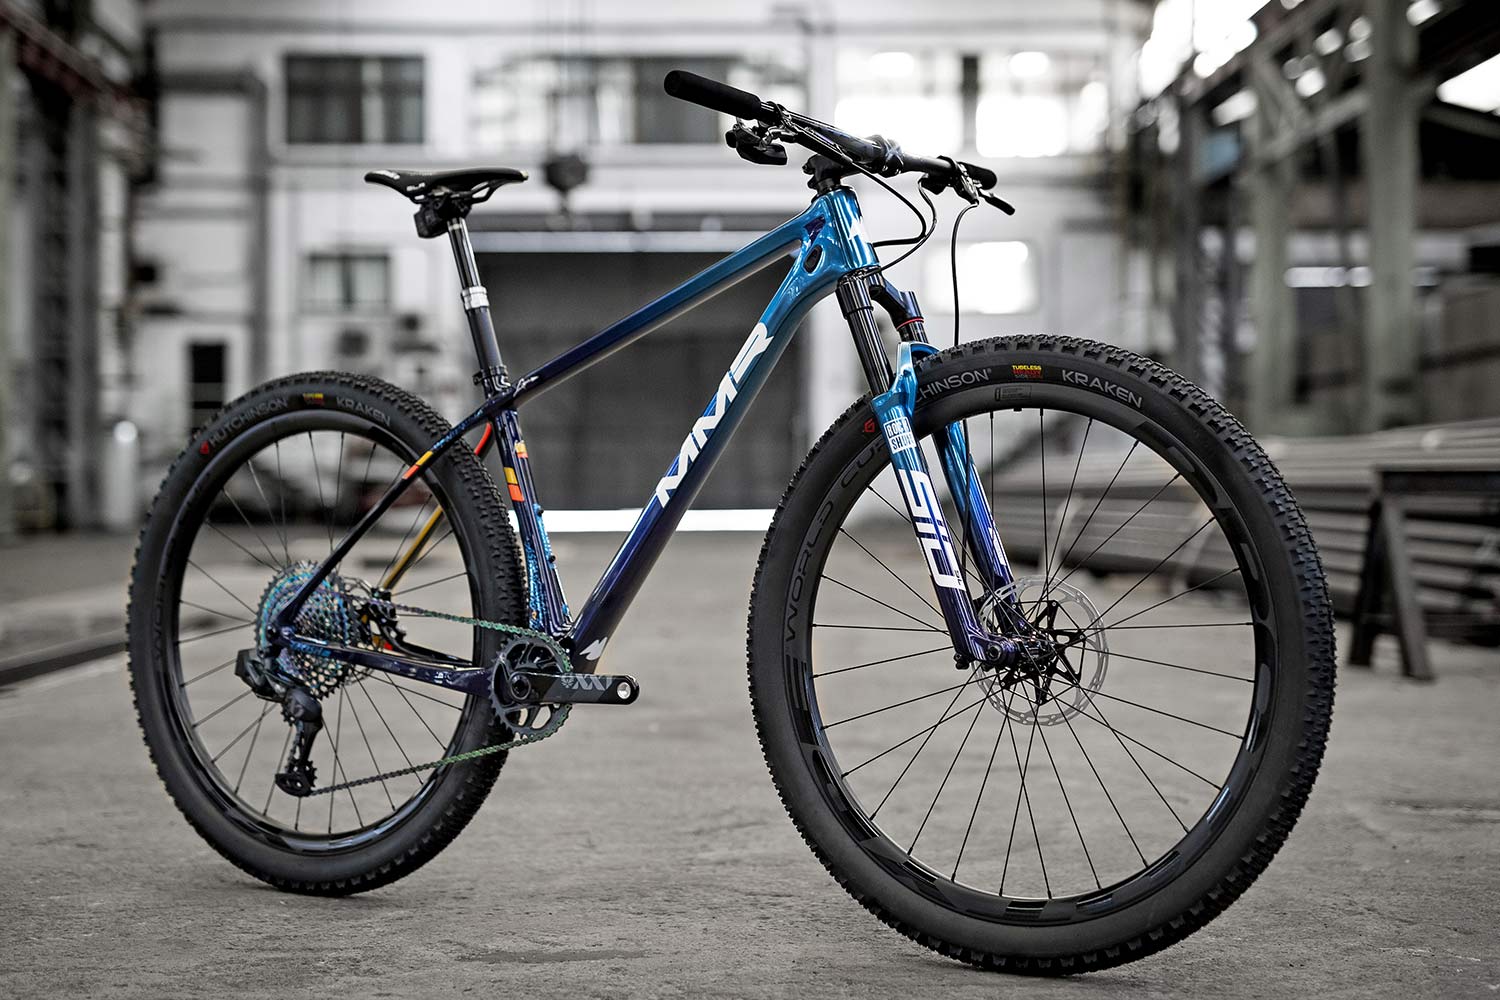 MMR x Fernando Alonso special edition road & mountain bikes, XC hardtail